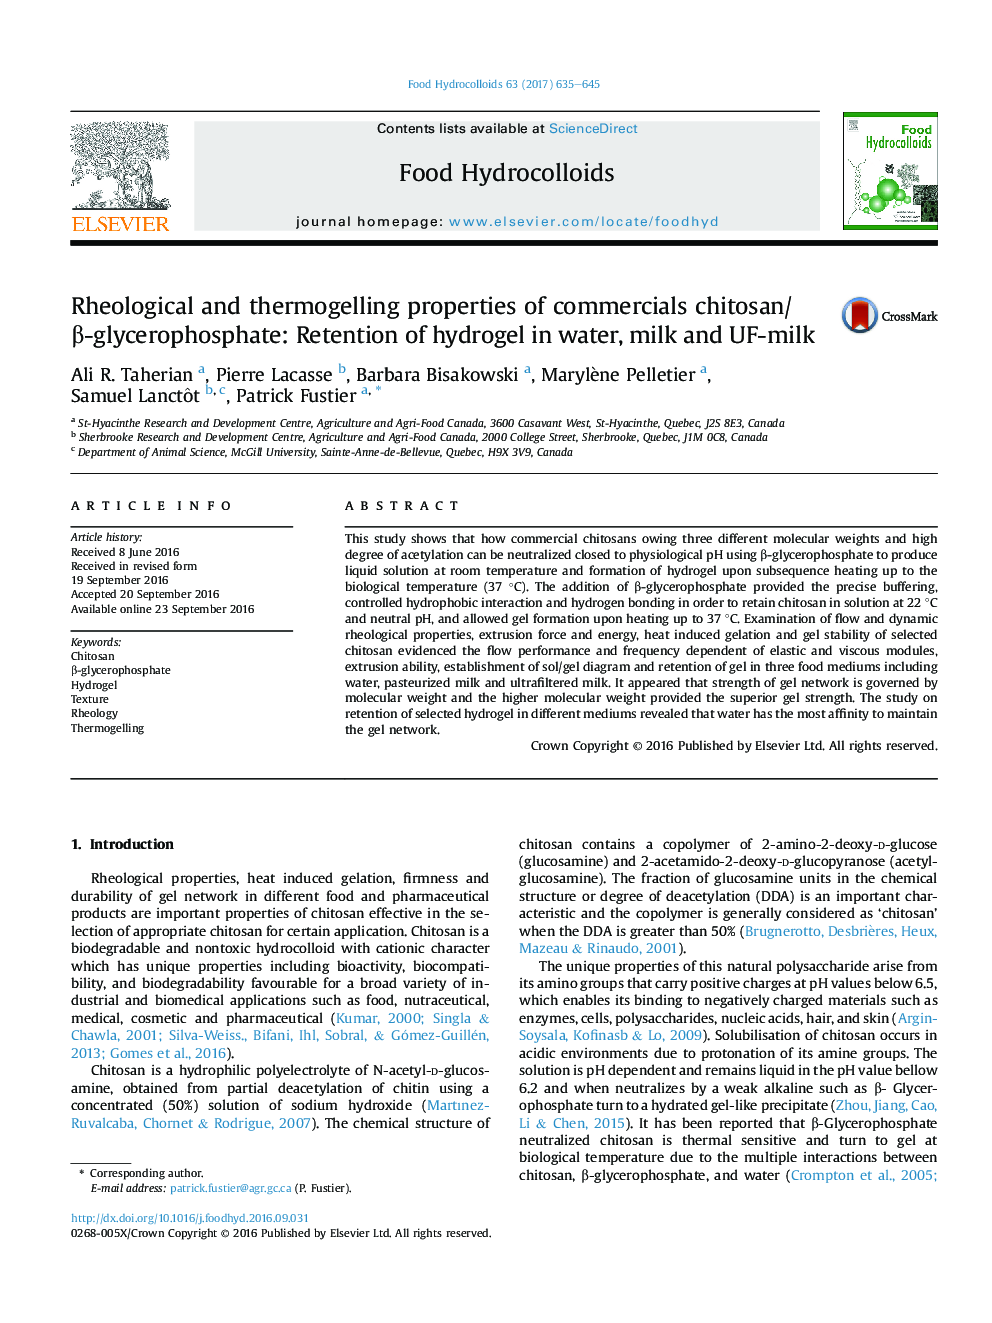 Rheological and thermogelling properties of commercials chitosan/Î²-glycerophosphate: Retention of hydrogel in water, milk and UF-milk